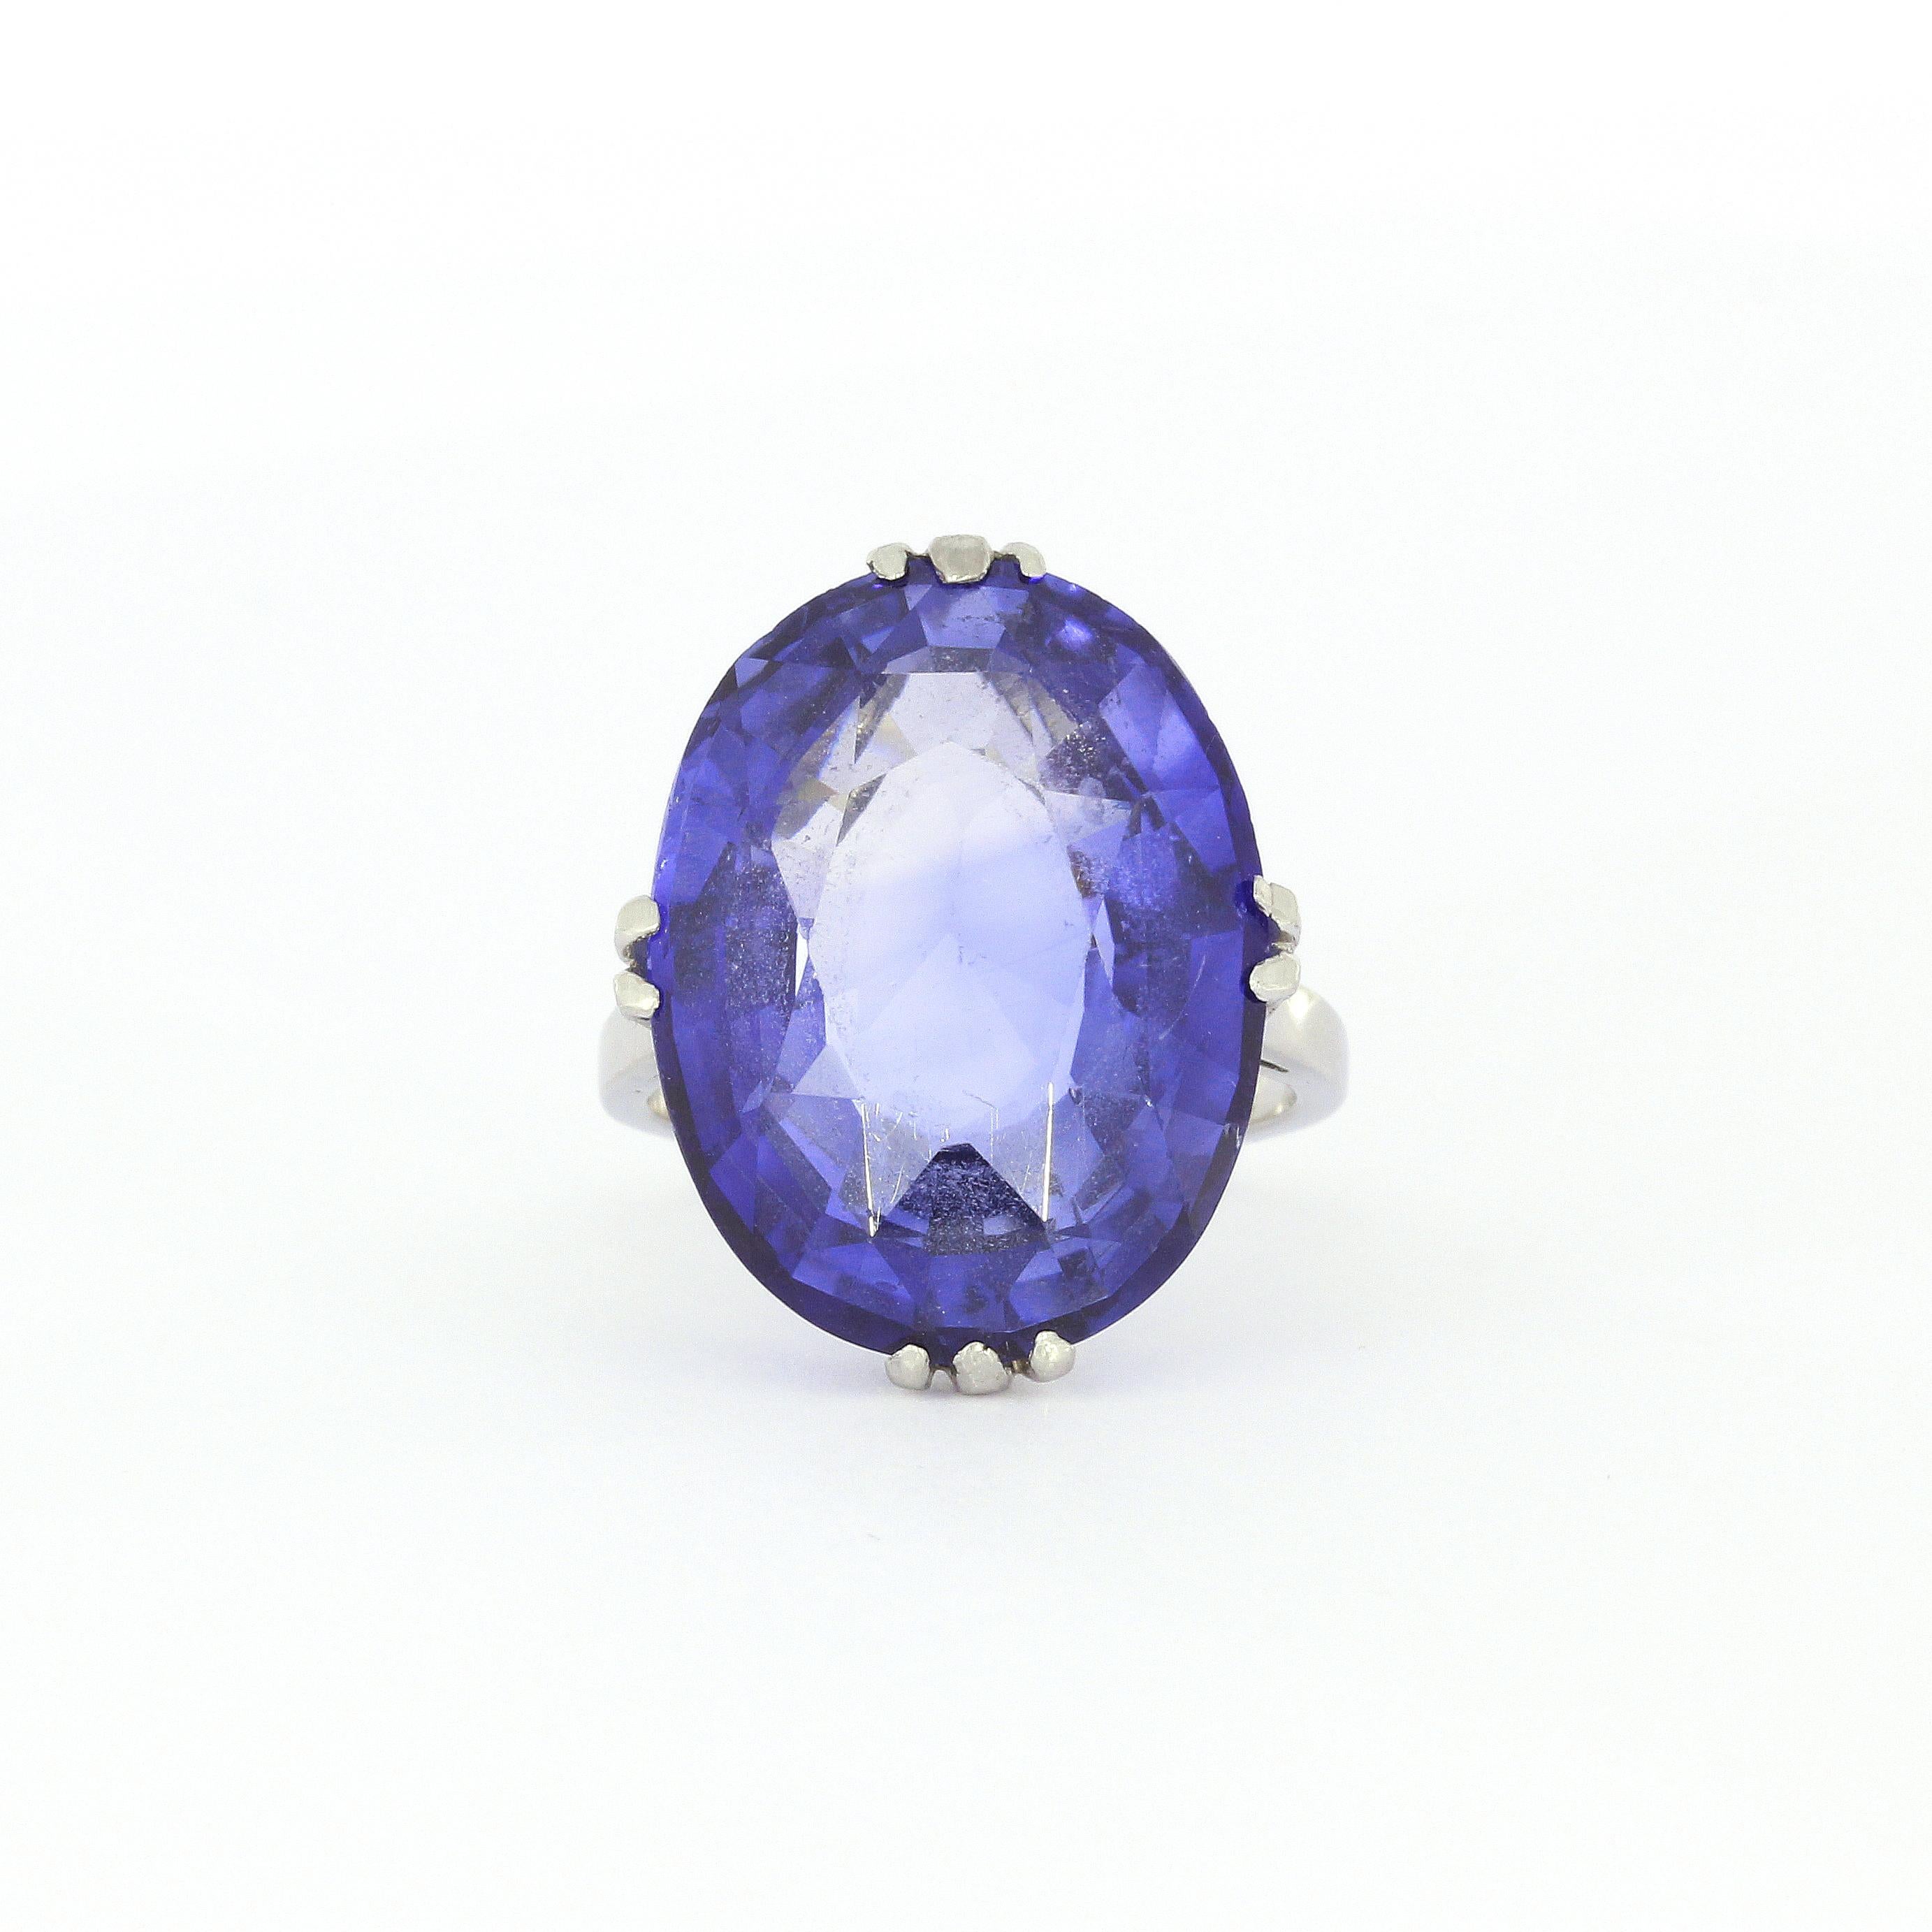 Authentic Antique Blue Synthetic Sapphire in a typical Ceylon color from around 1900-1930.
These synthetic sapphires were commonly used in high grade jewelry from the early 1900s and later. 

Weight of synthetic sapphire: 10 Carat plus 

L: 22mm
W: